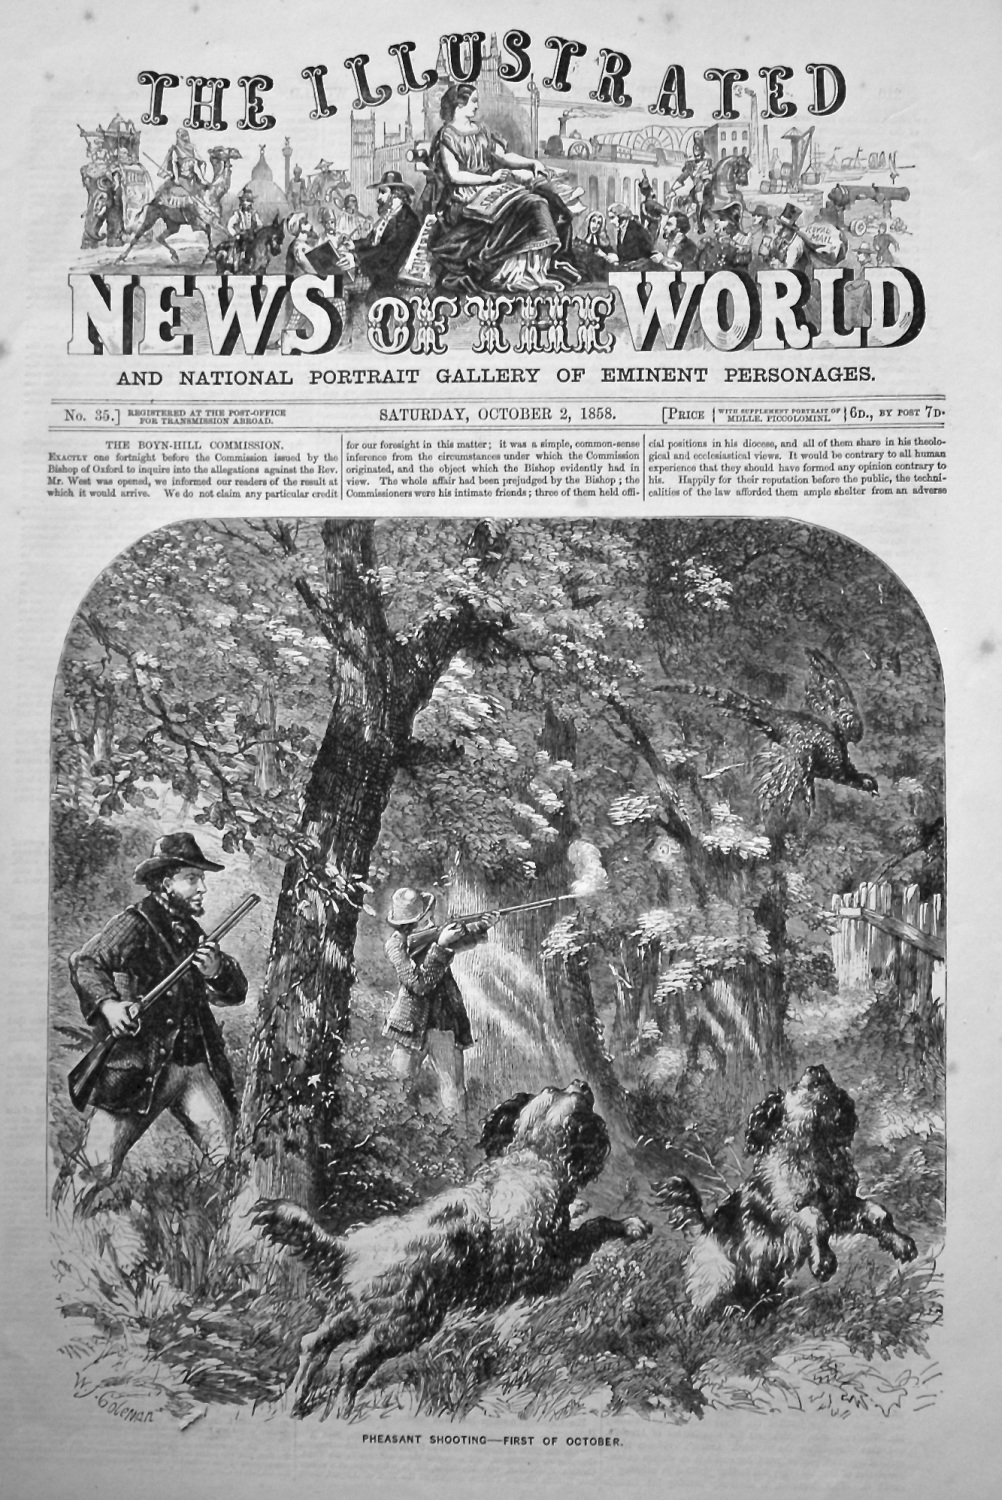 The Illustrated News of the World. October 2nd, 1858.